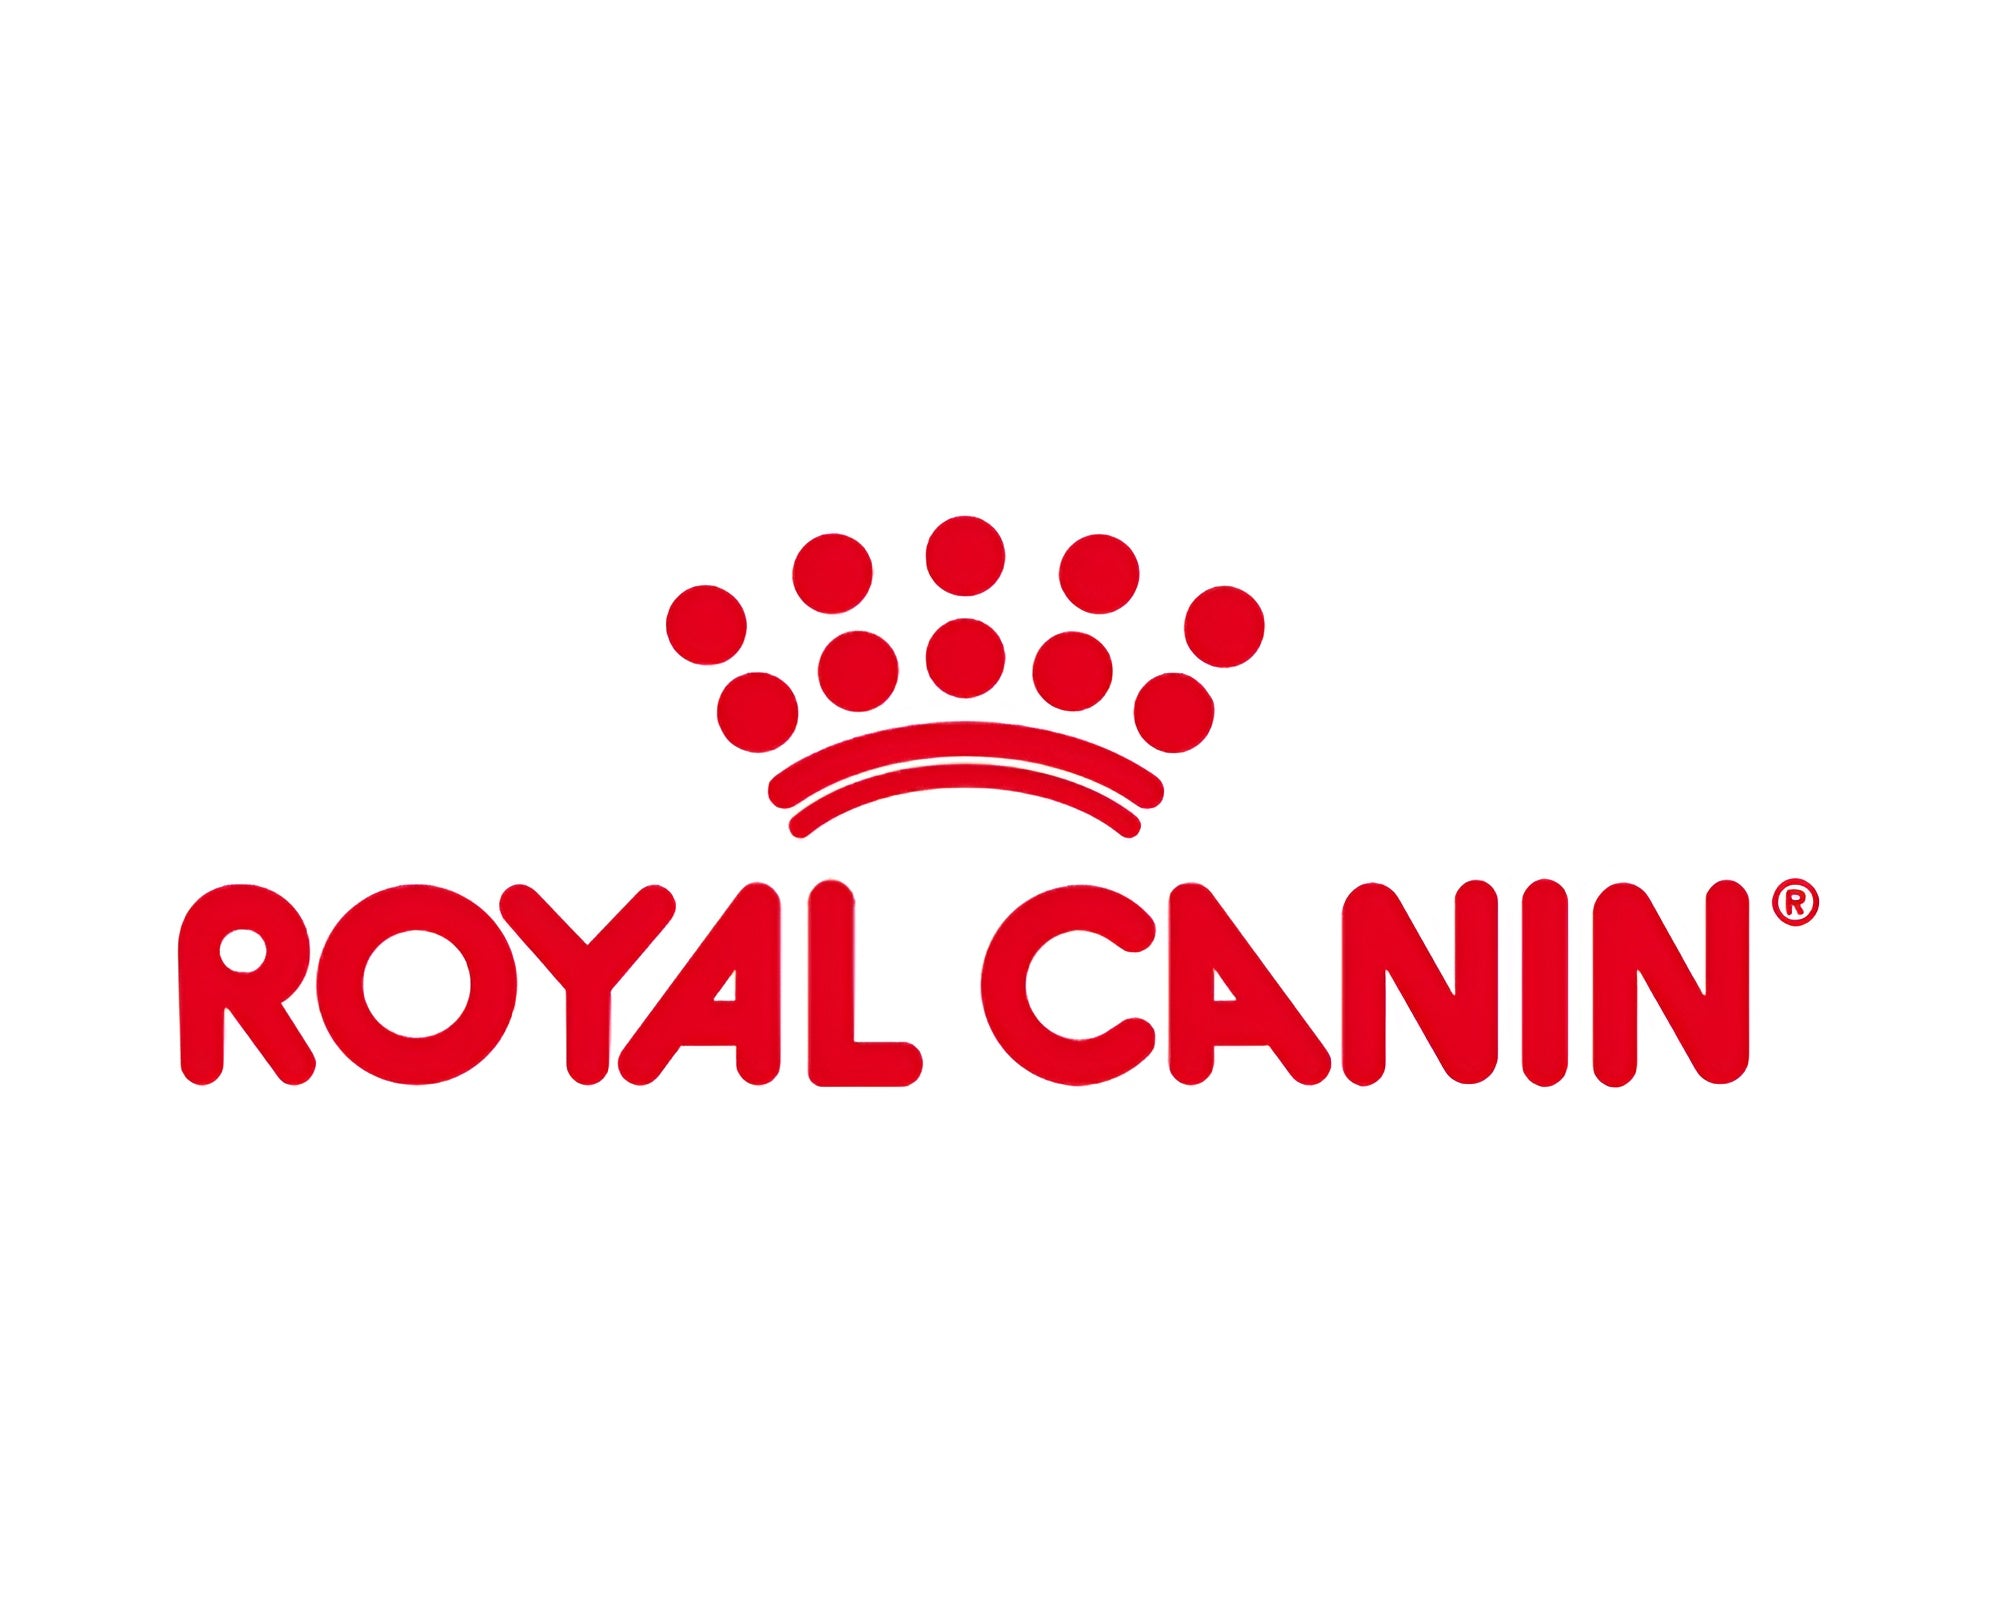 Royal Canin pet food logo featuring the brand name in red text with a crown icon above.